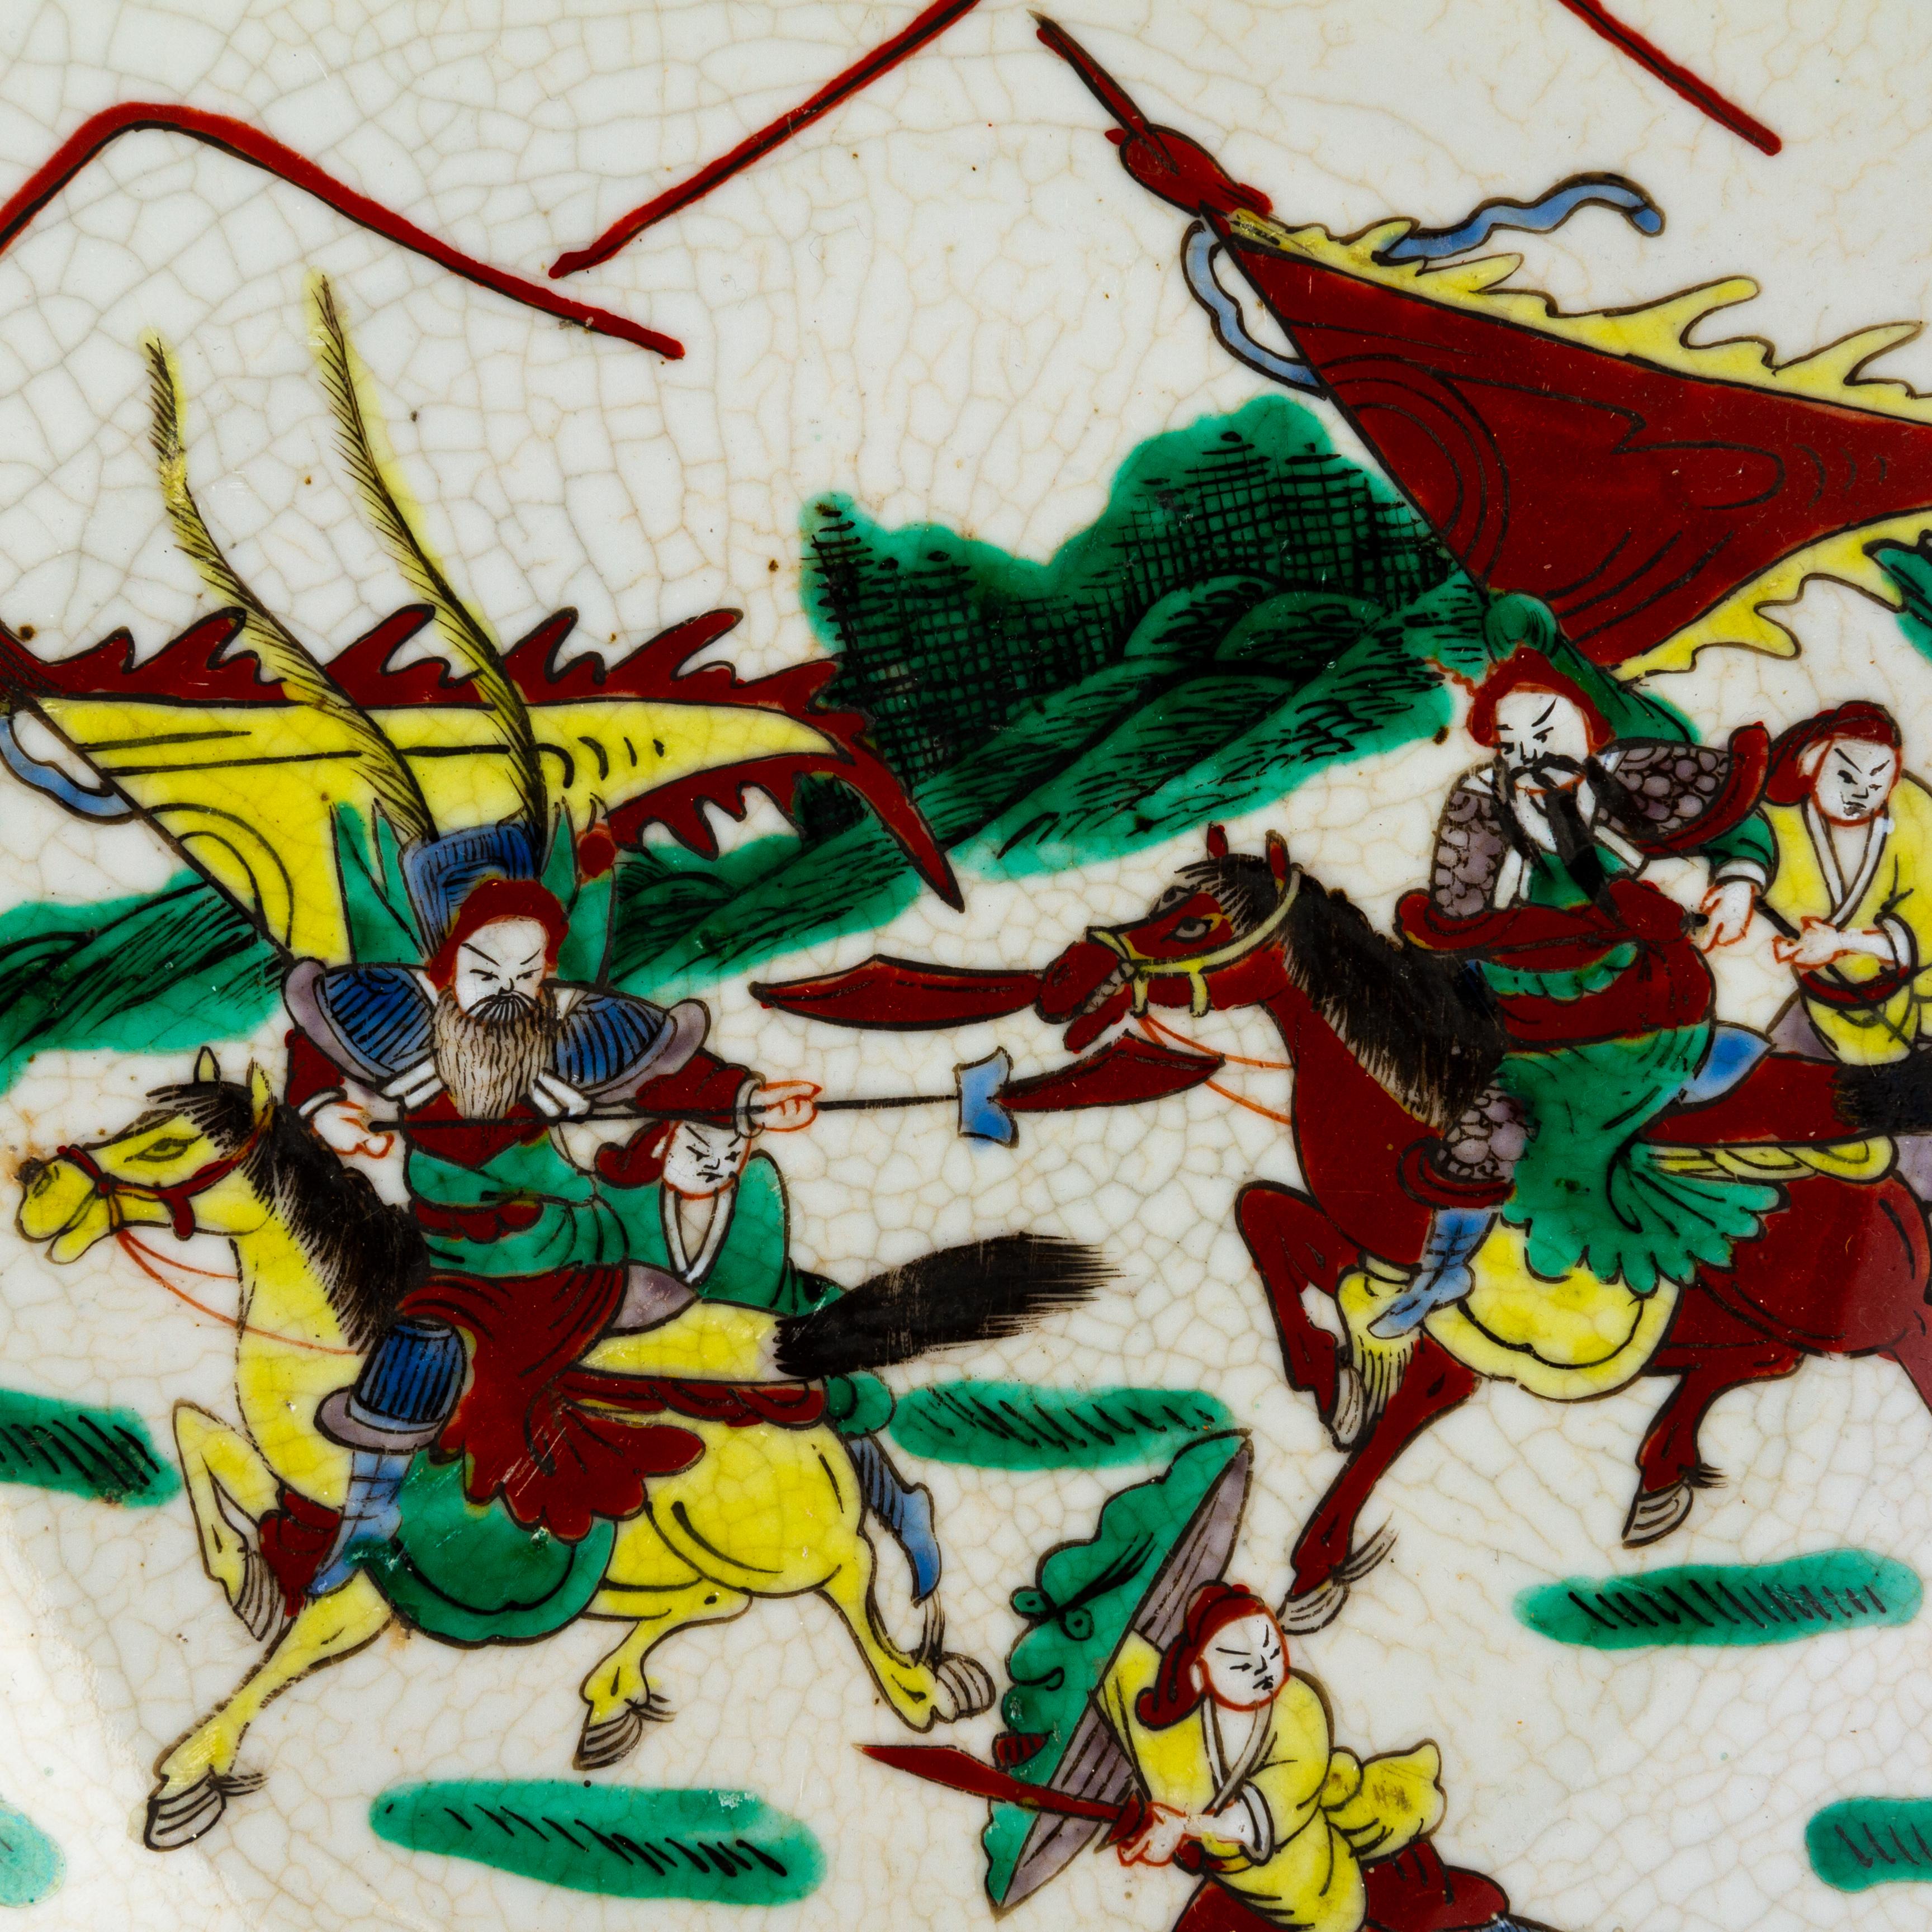 In good condition
From a private collection
Chinese Qing crackle-glazed ceramic charger, depicting Nanking Warriors